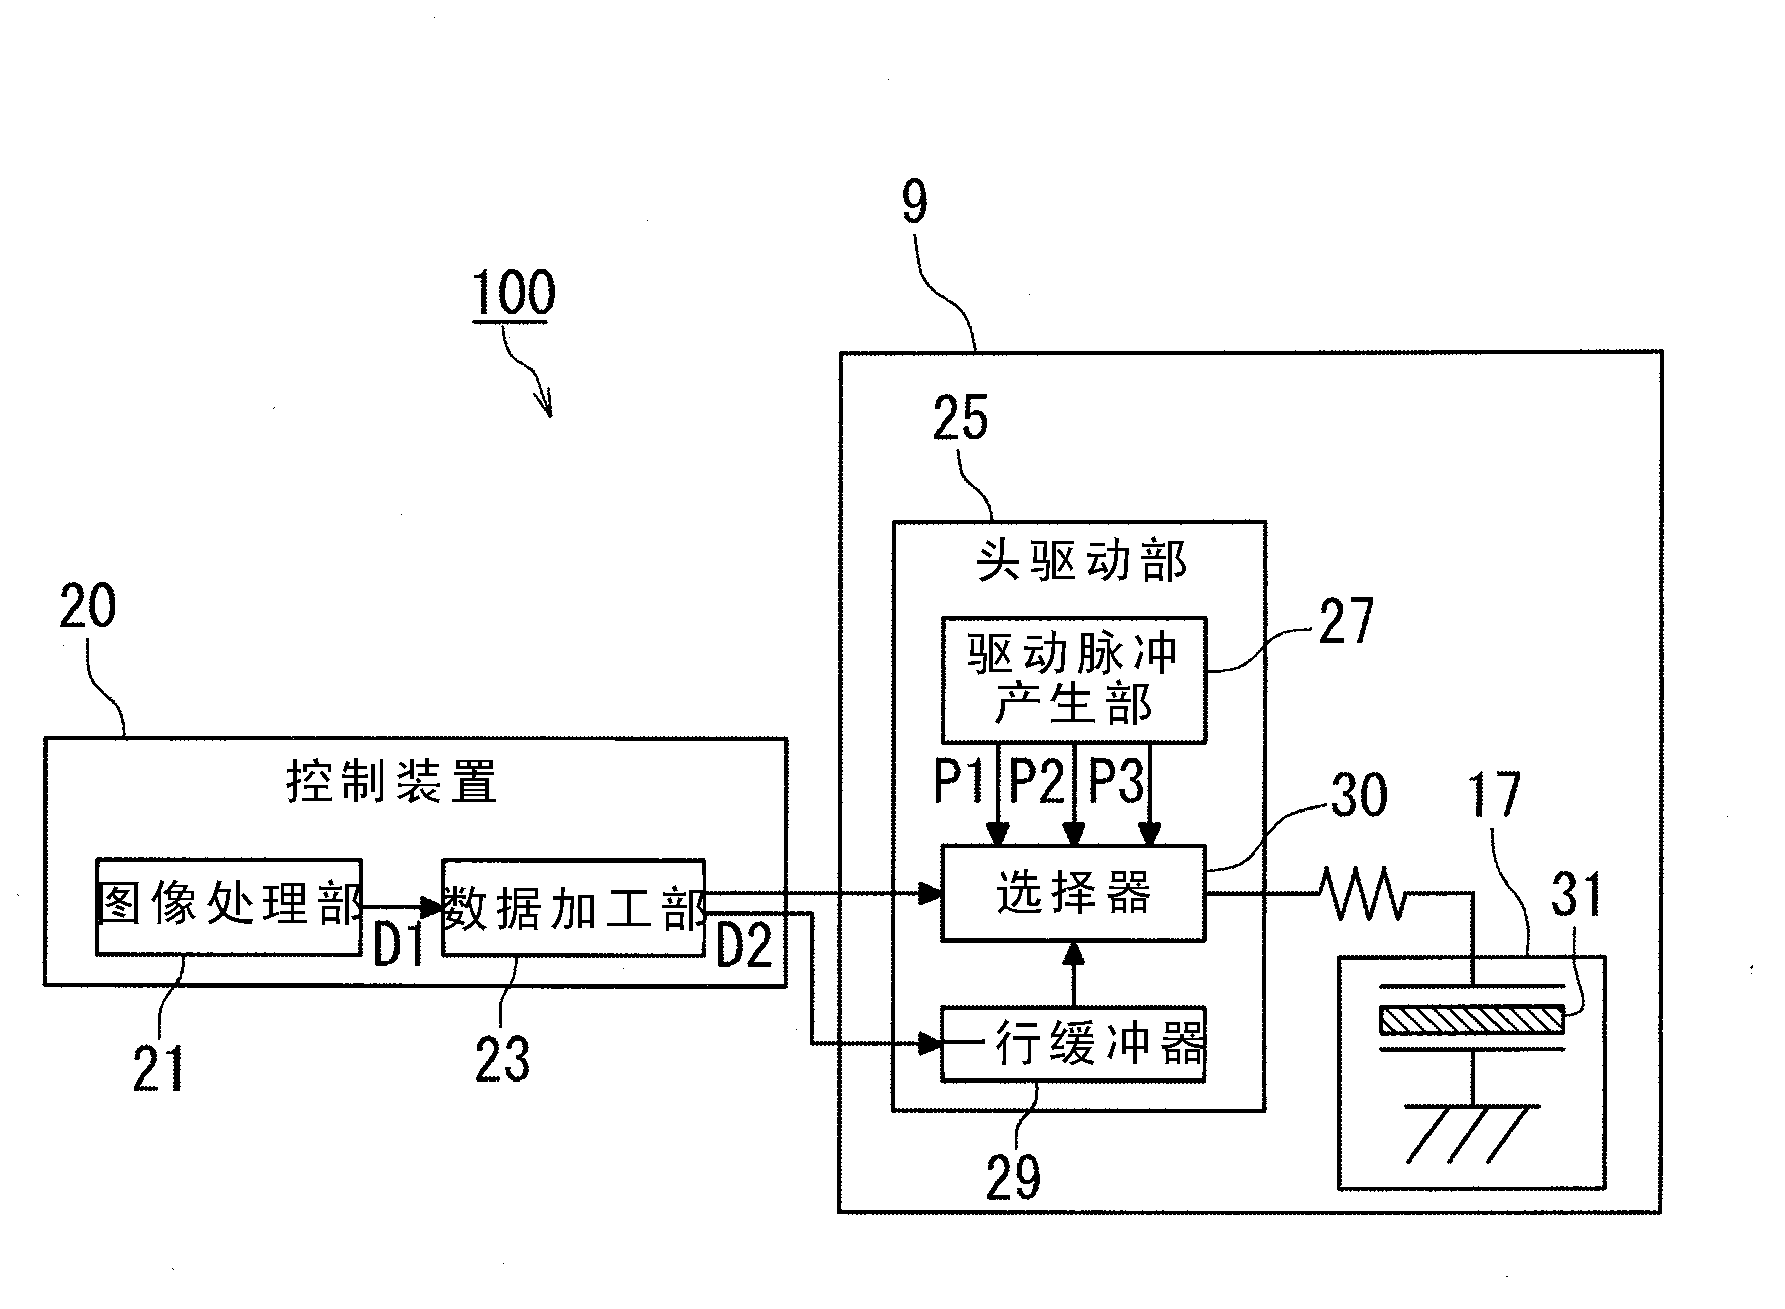 Inkjet recording device and image forming apparatus for stable ink ejection